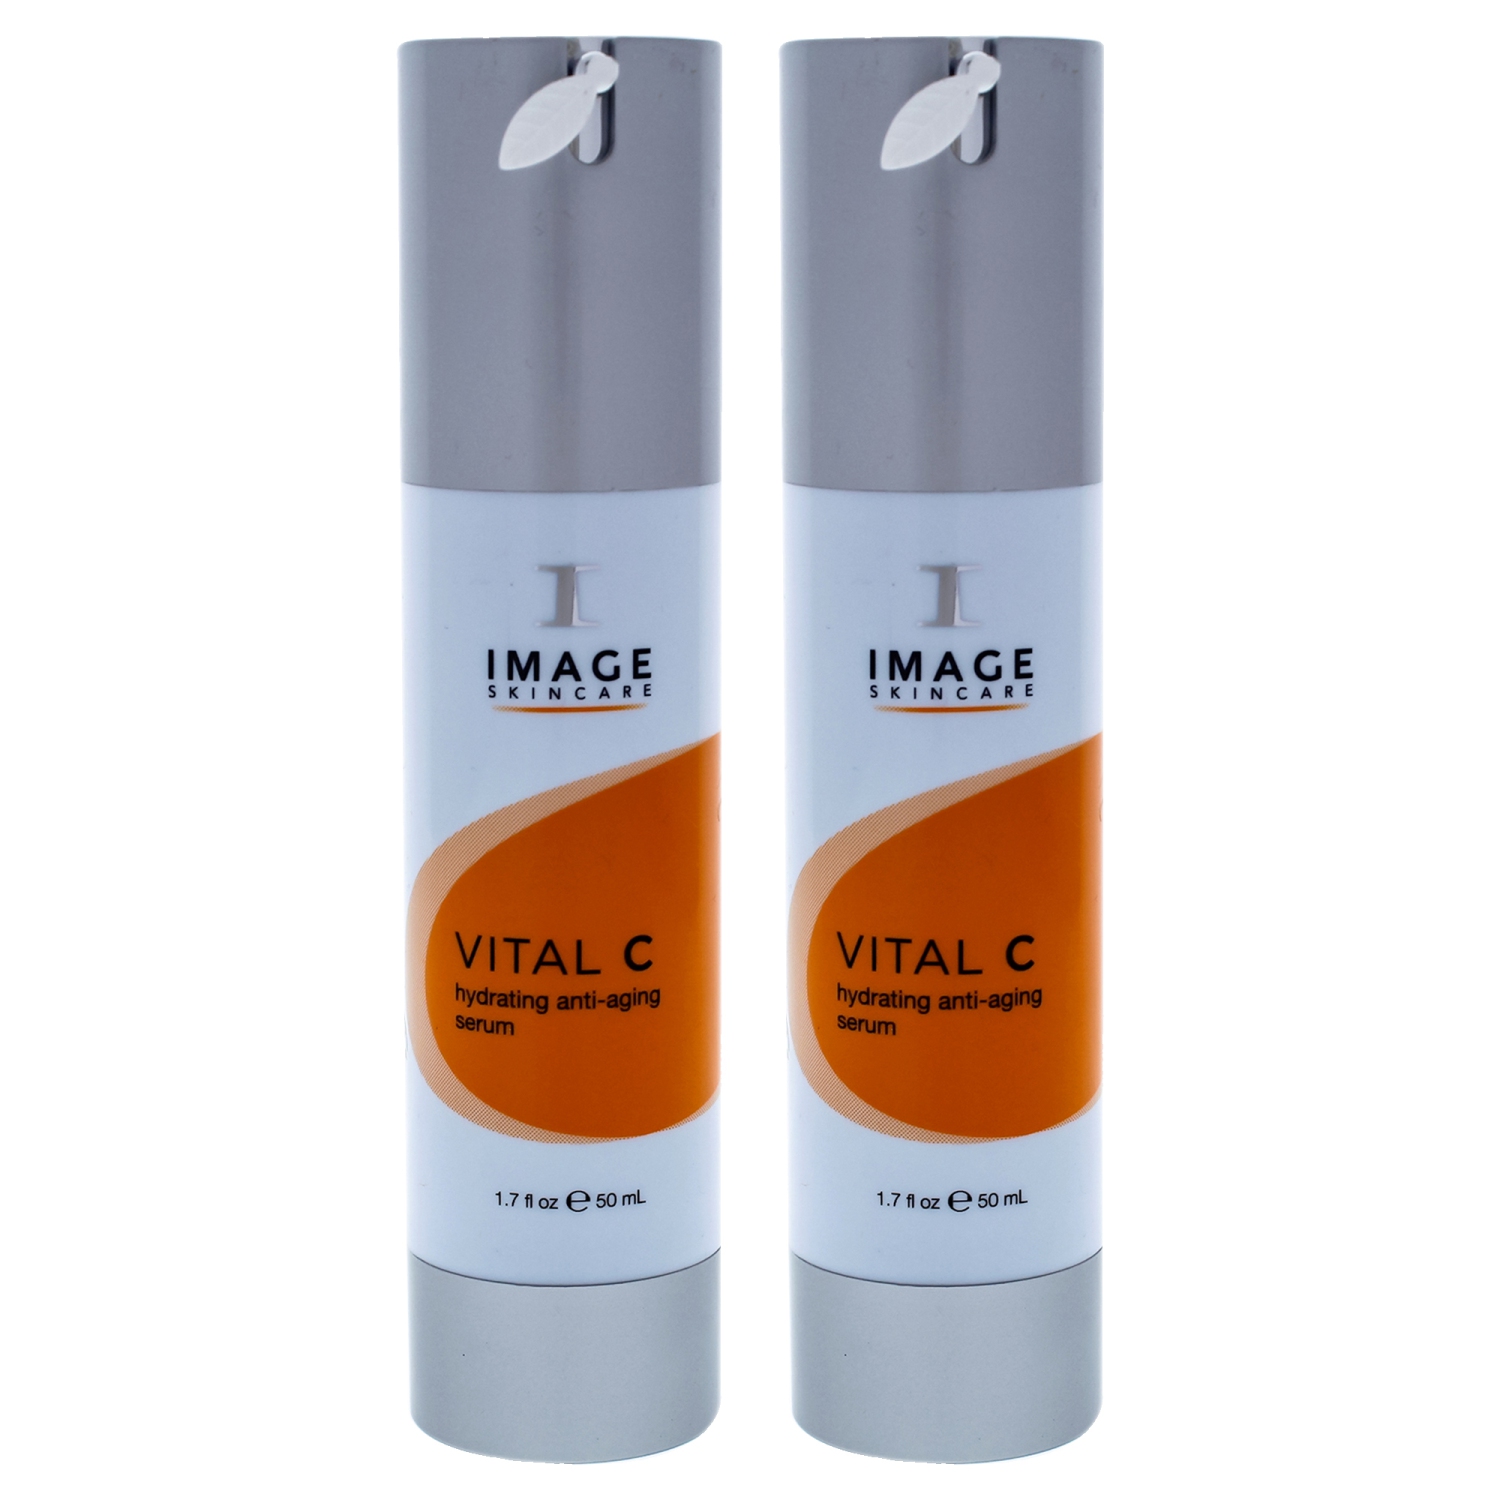 Vital C Hydrating Anti Age Serum by Image for Unisex - 1.7 oz Serum - Pack of 2